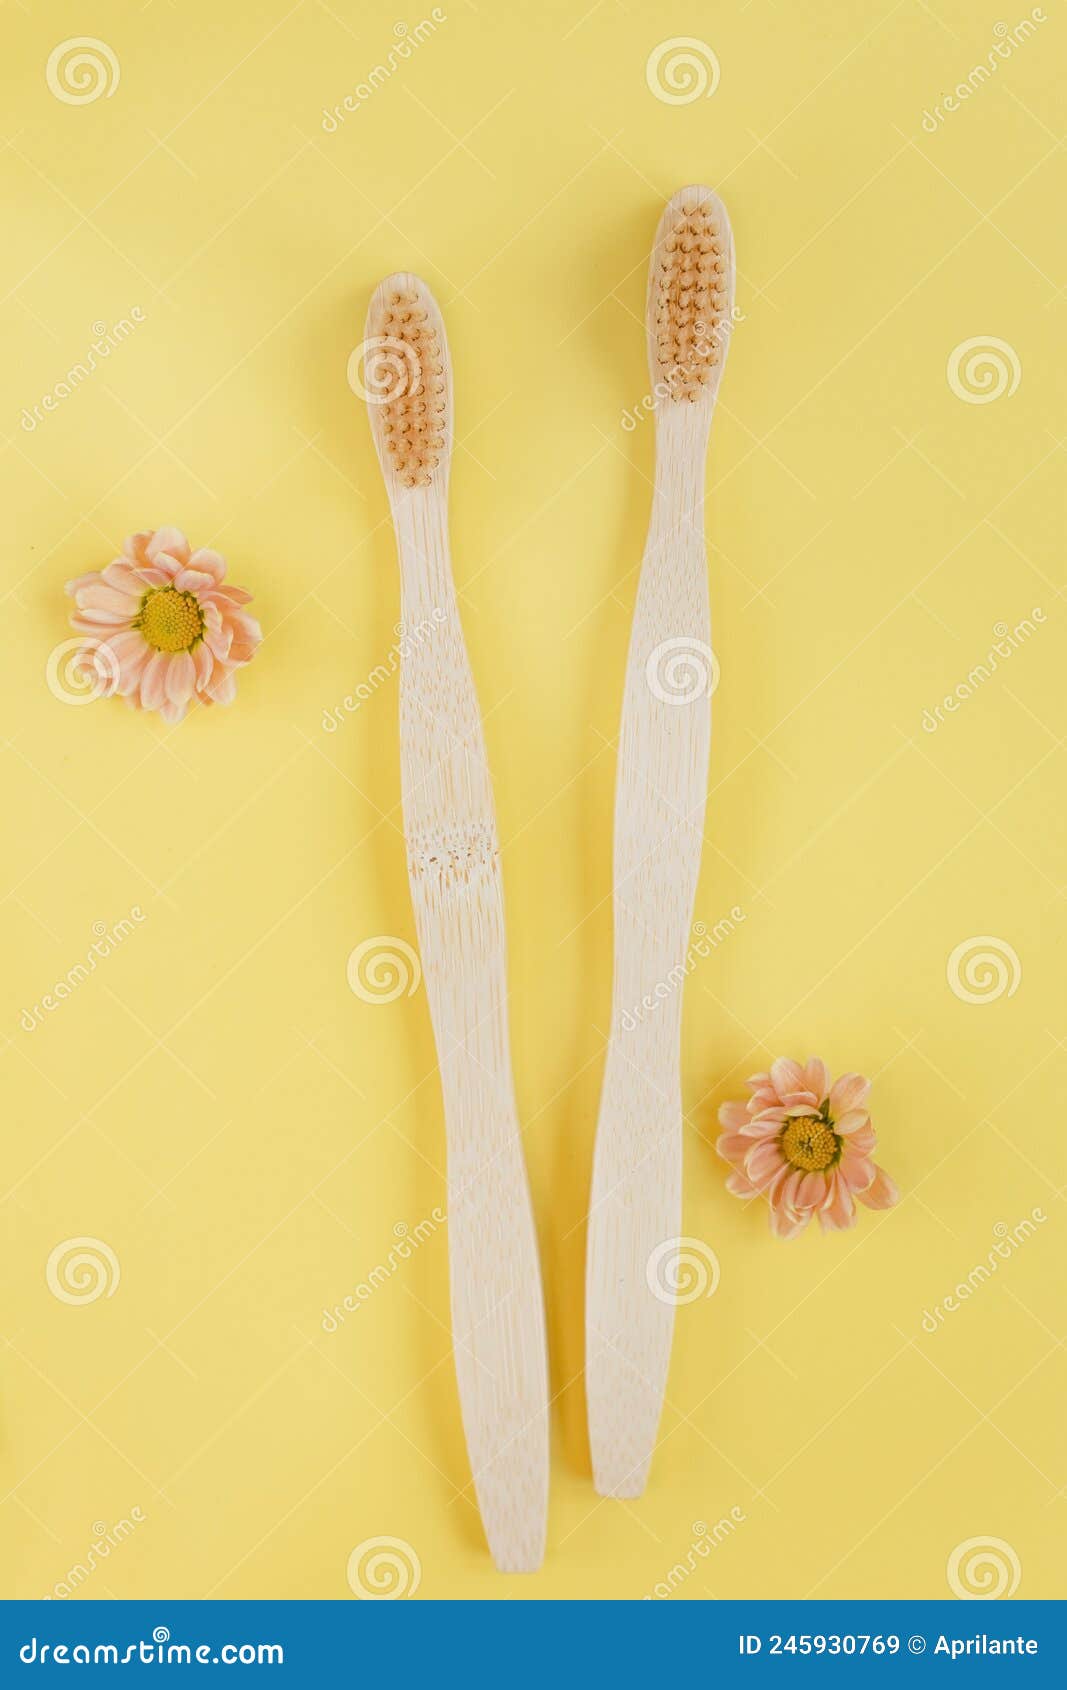 wooden bamboo toothbrush on yellow background